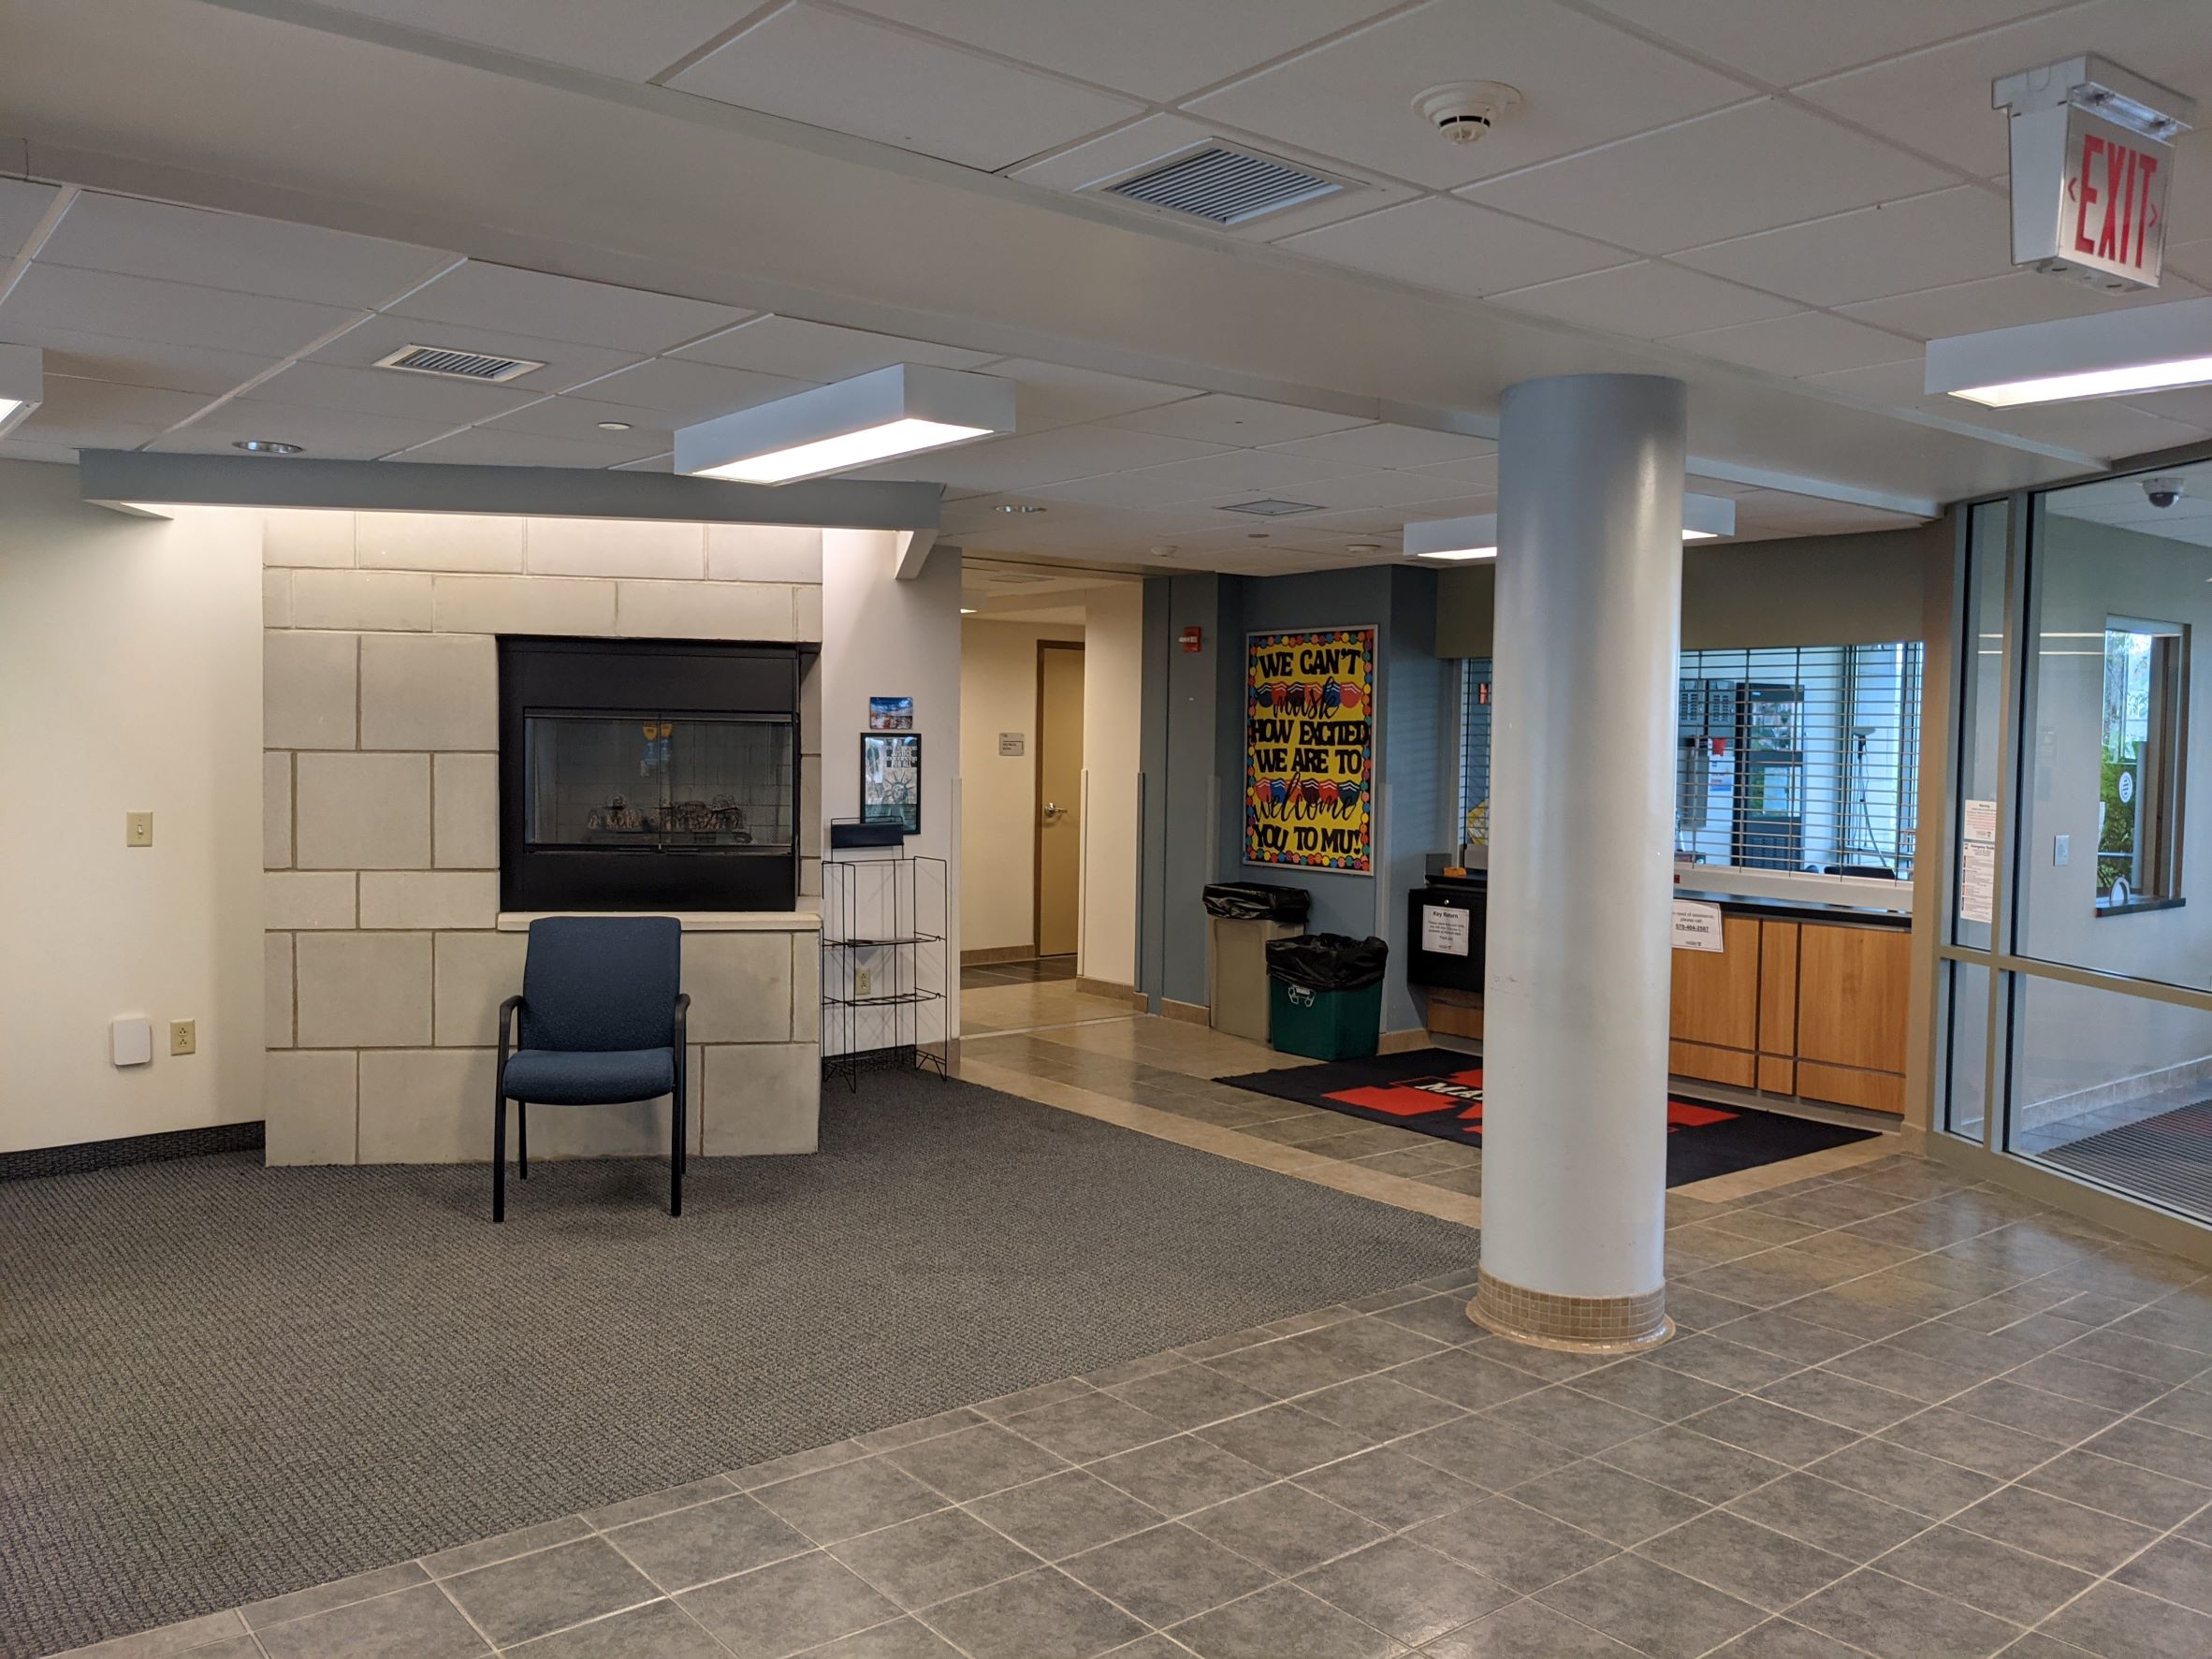 View of residence hall student housing building lobby with reception desk beyond, ceramic floor tile with carpet inlay area around stone corner style (2 sided) fireplace and doors into residents' wings beyond